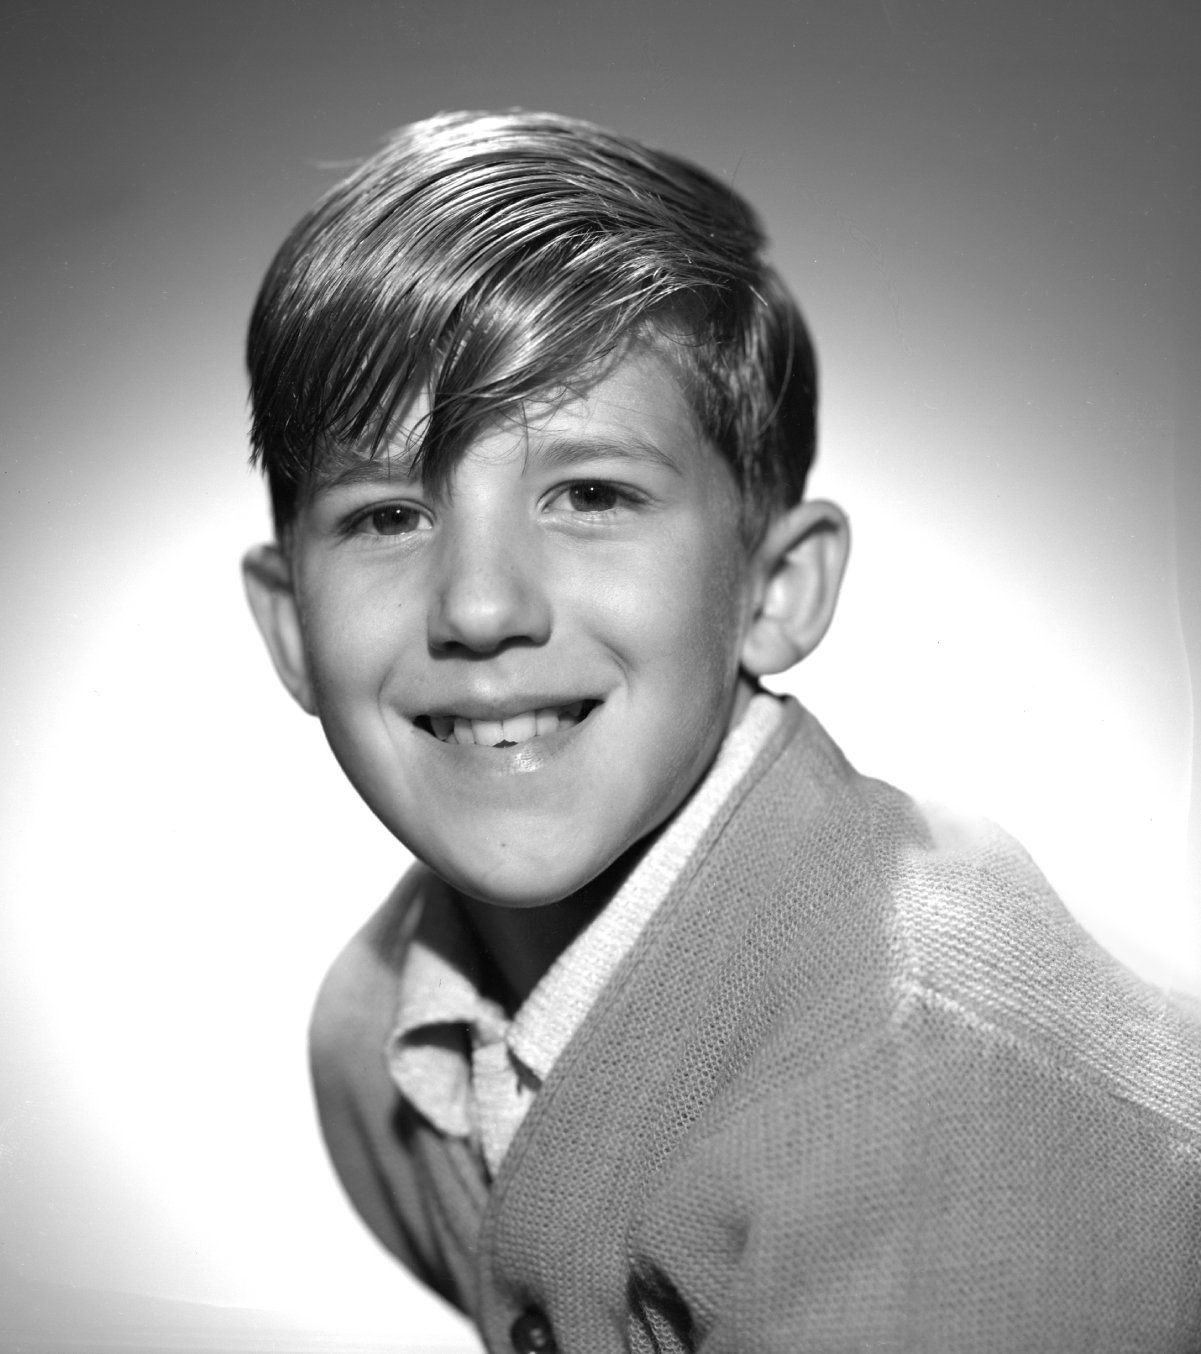 'The Andy Griffith Show's Johnny Paul Jason played by Keith Thibodeaux ,1962